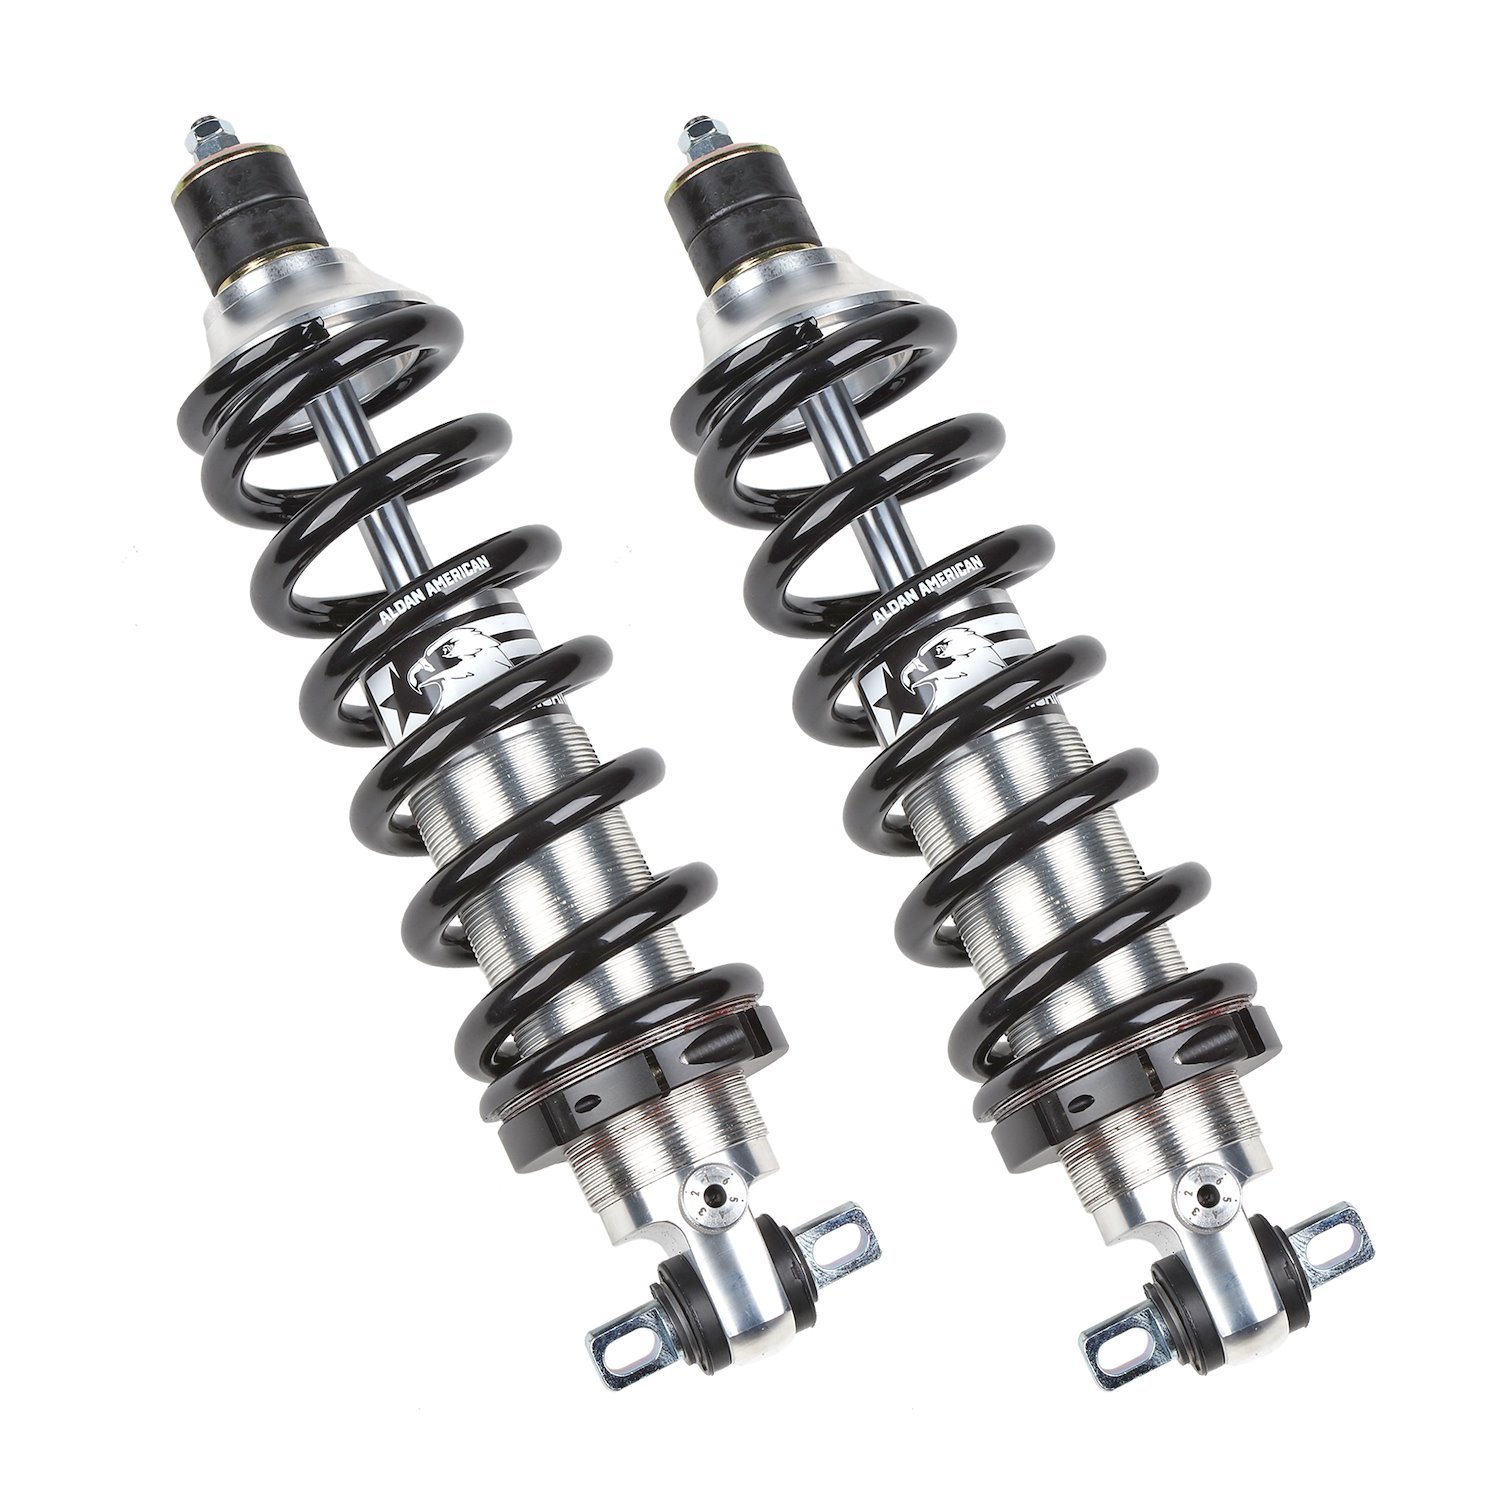 Road Comp Series Front Coilover Conversion Kit 1988-1996 Chevy Corvette, Single-Adjustable [500 lbs./in. Springs]